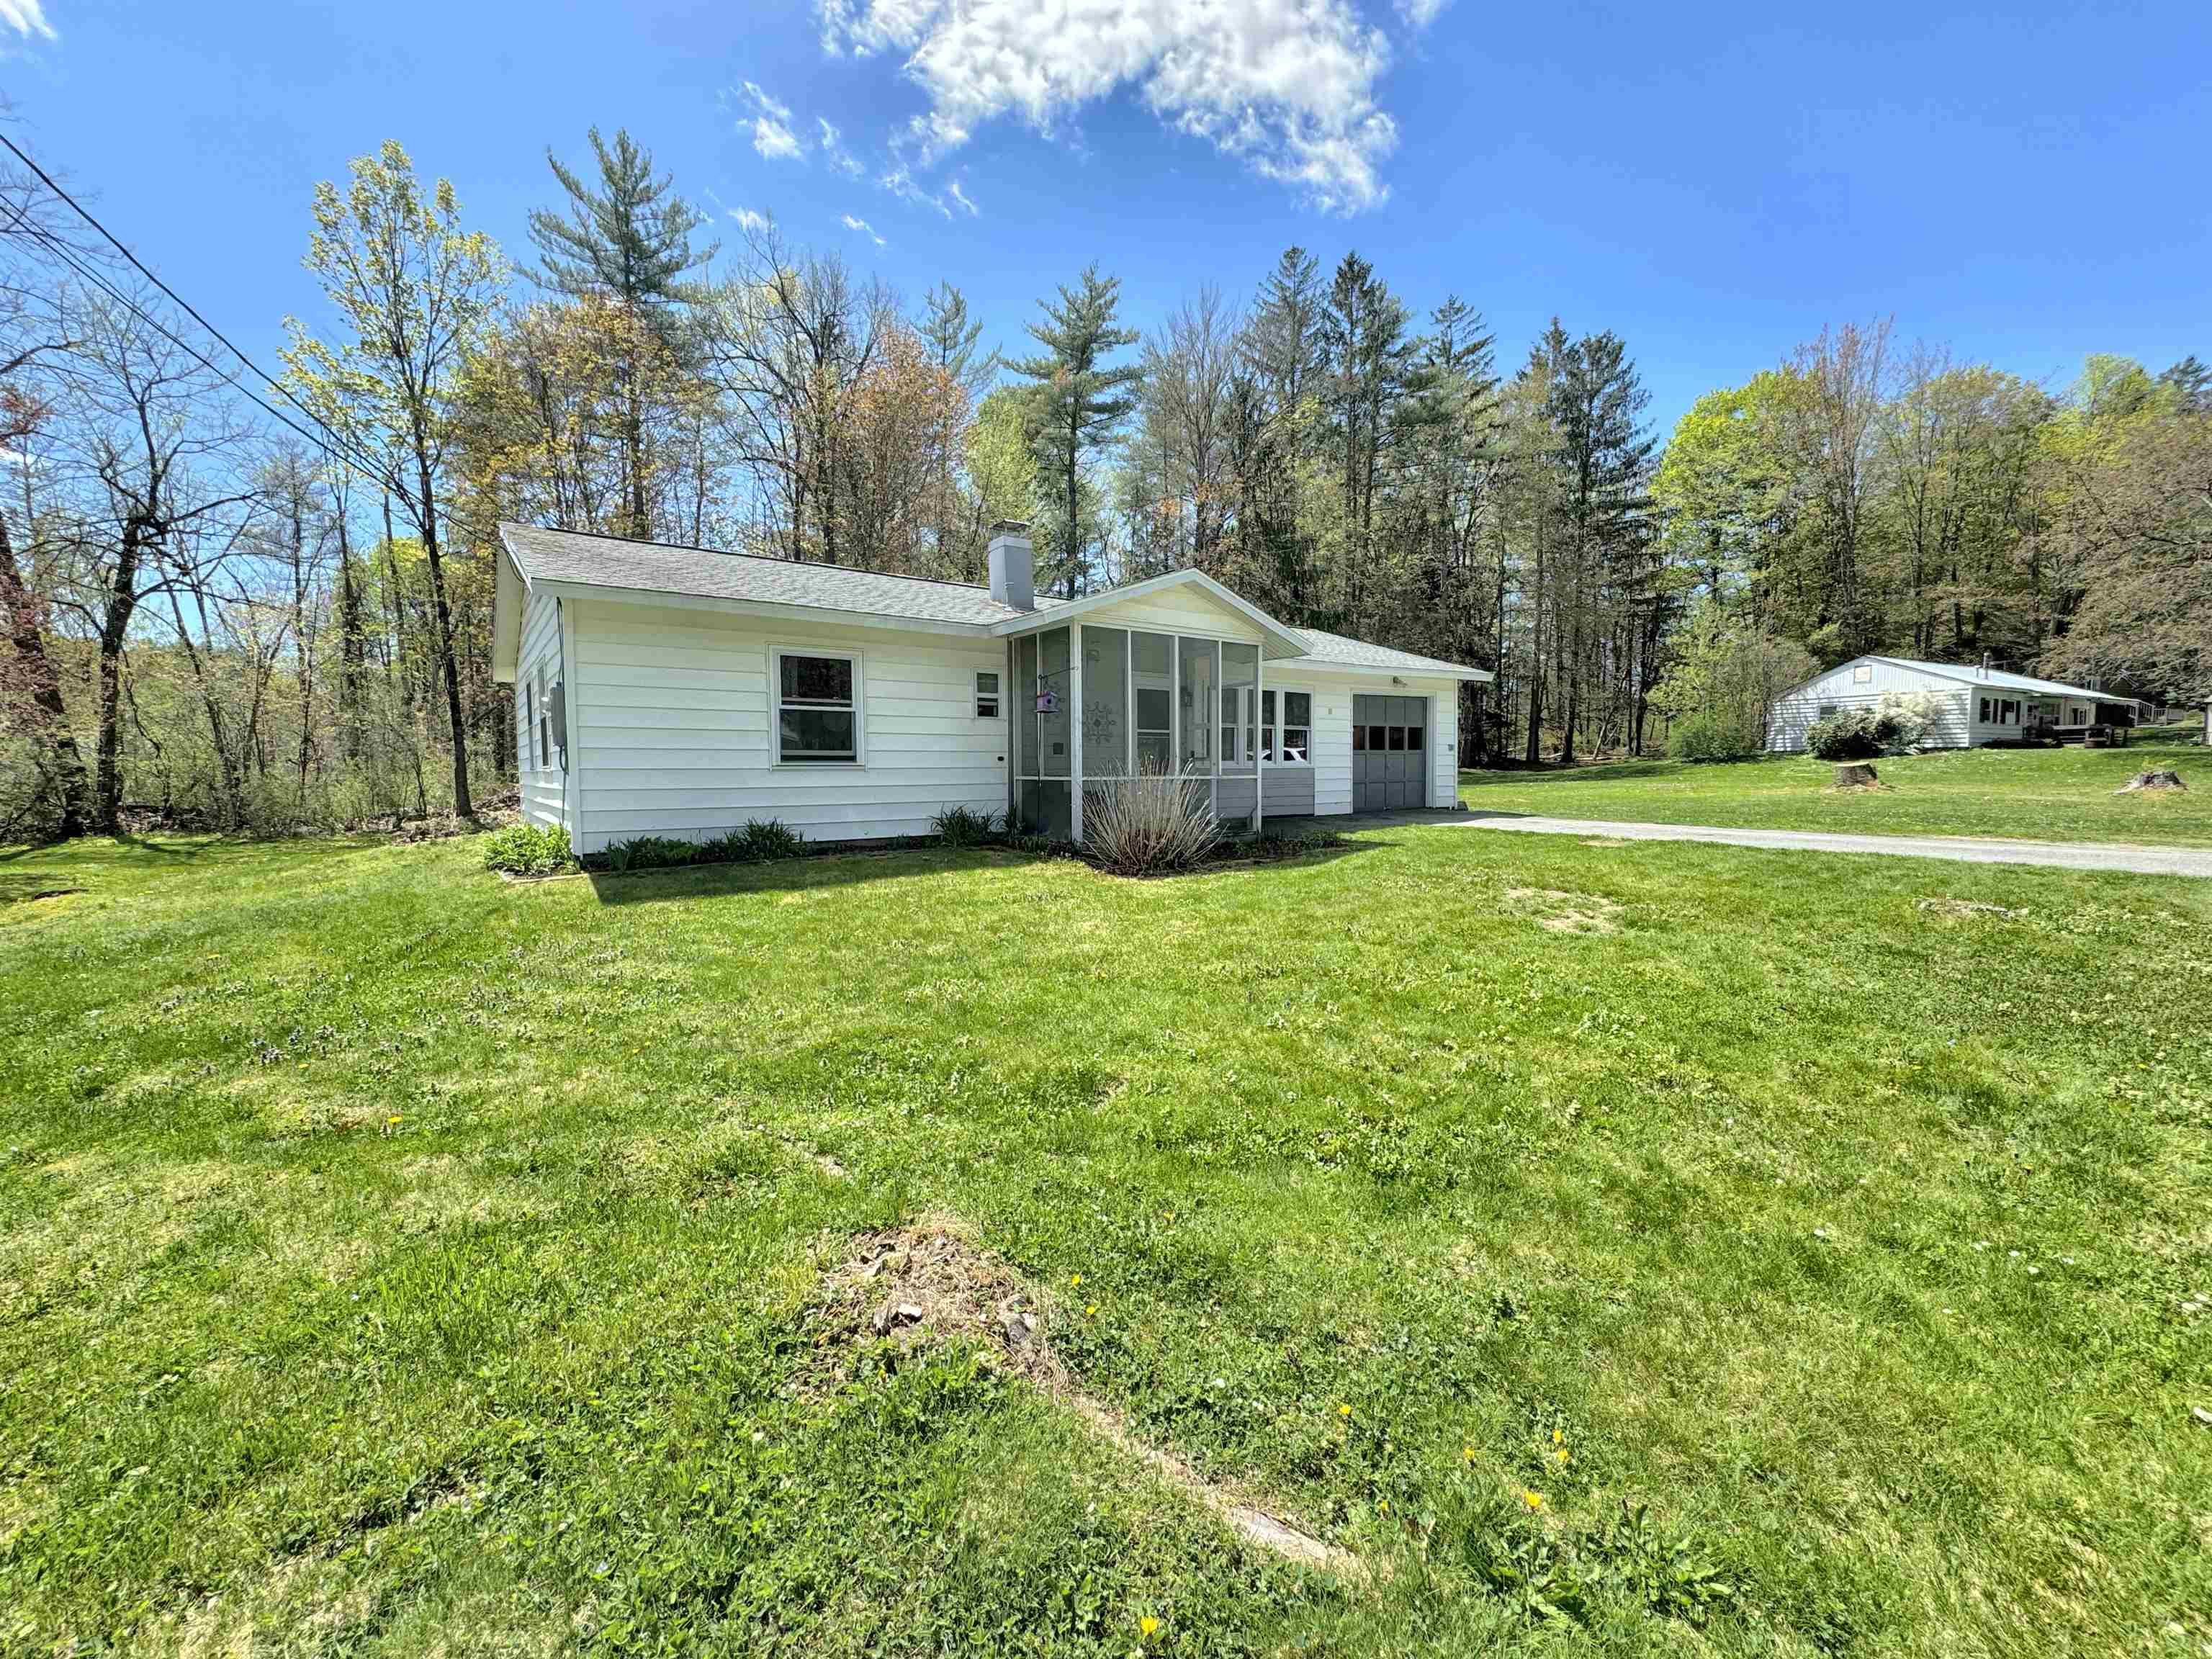 image of Claremont NH Home | sq.ft. 925 